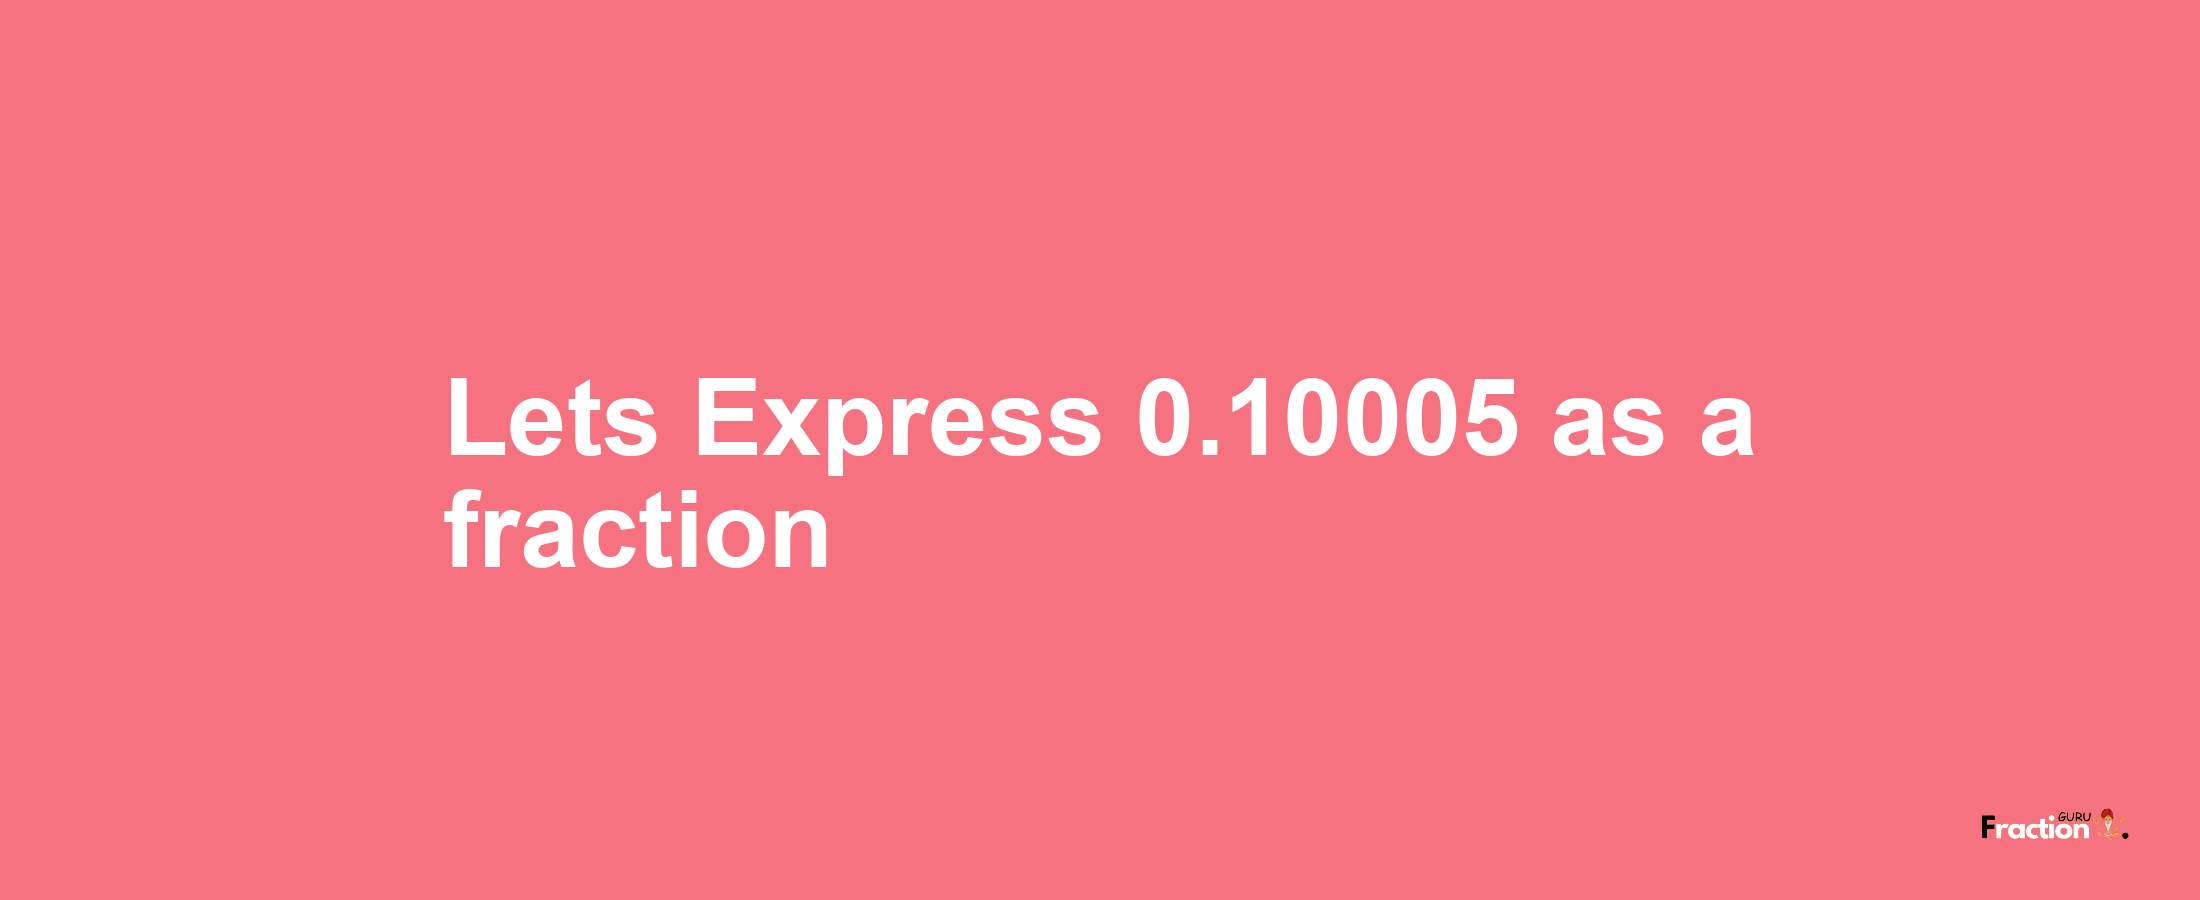 Lets Express 0.10005 as afraction